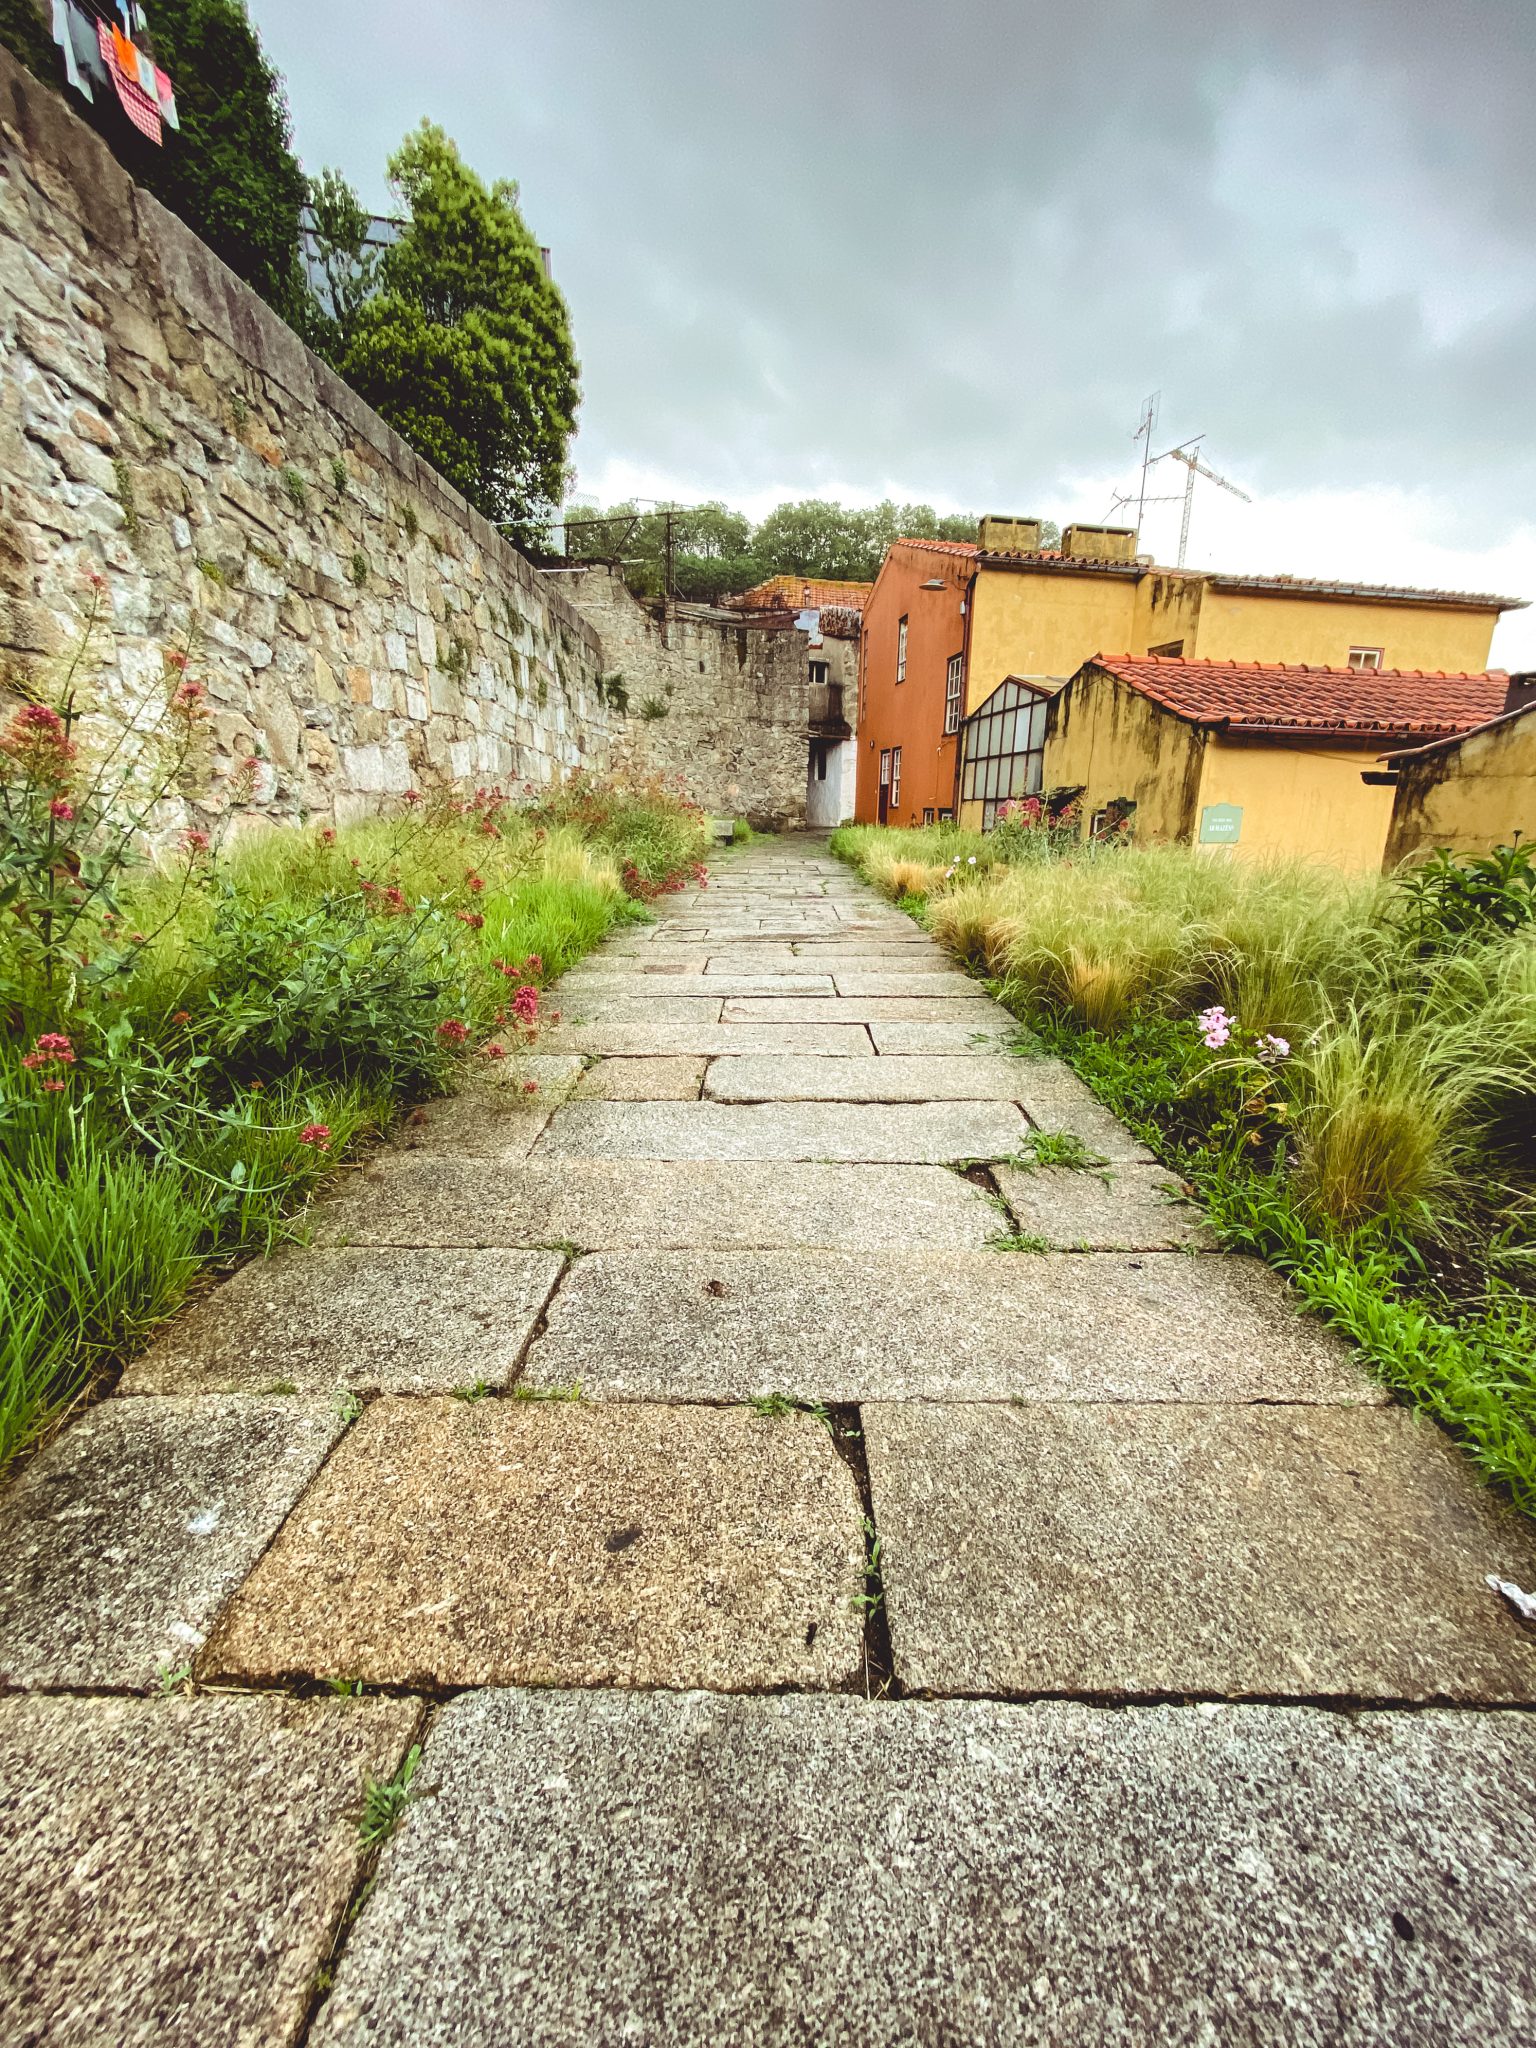 Very old stone sidewalk in Porto, Portugal. Surrounded with plants, flowers, grass and old buildings.